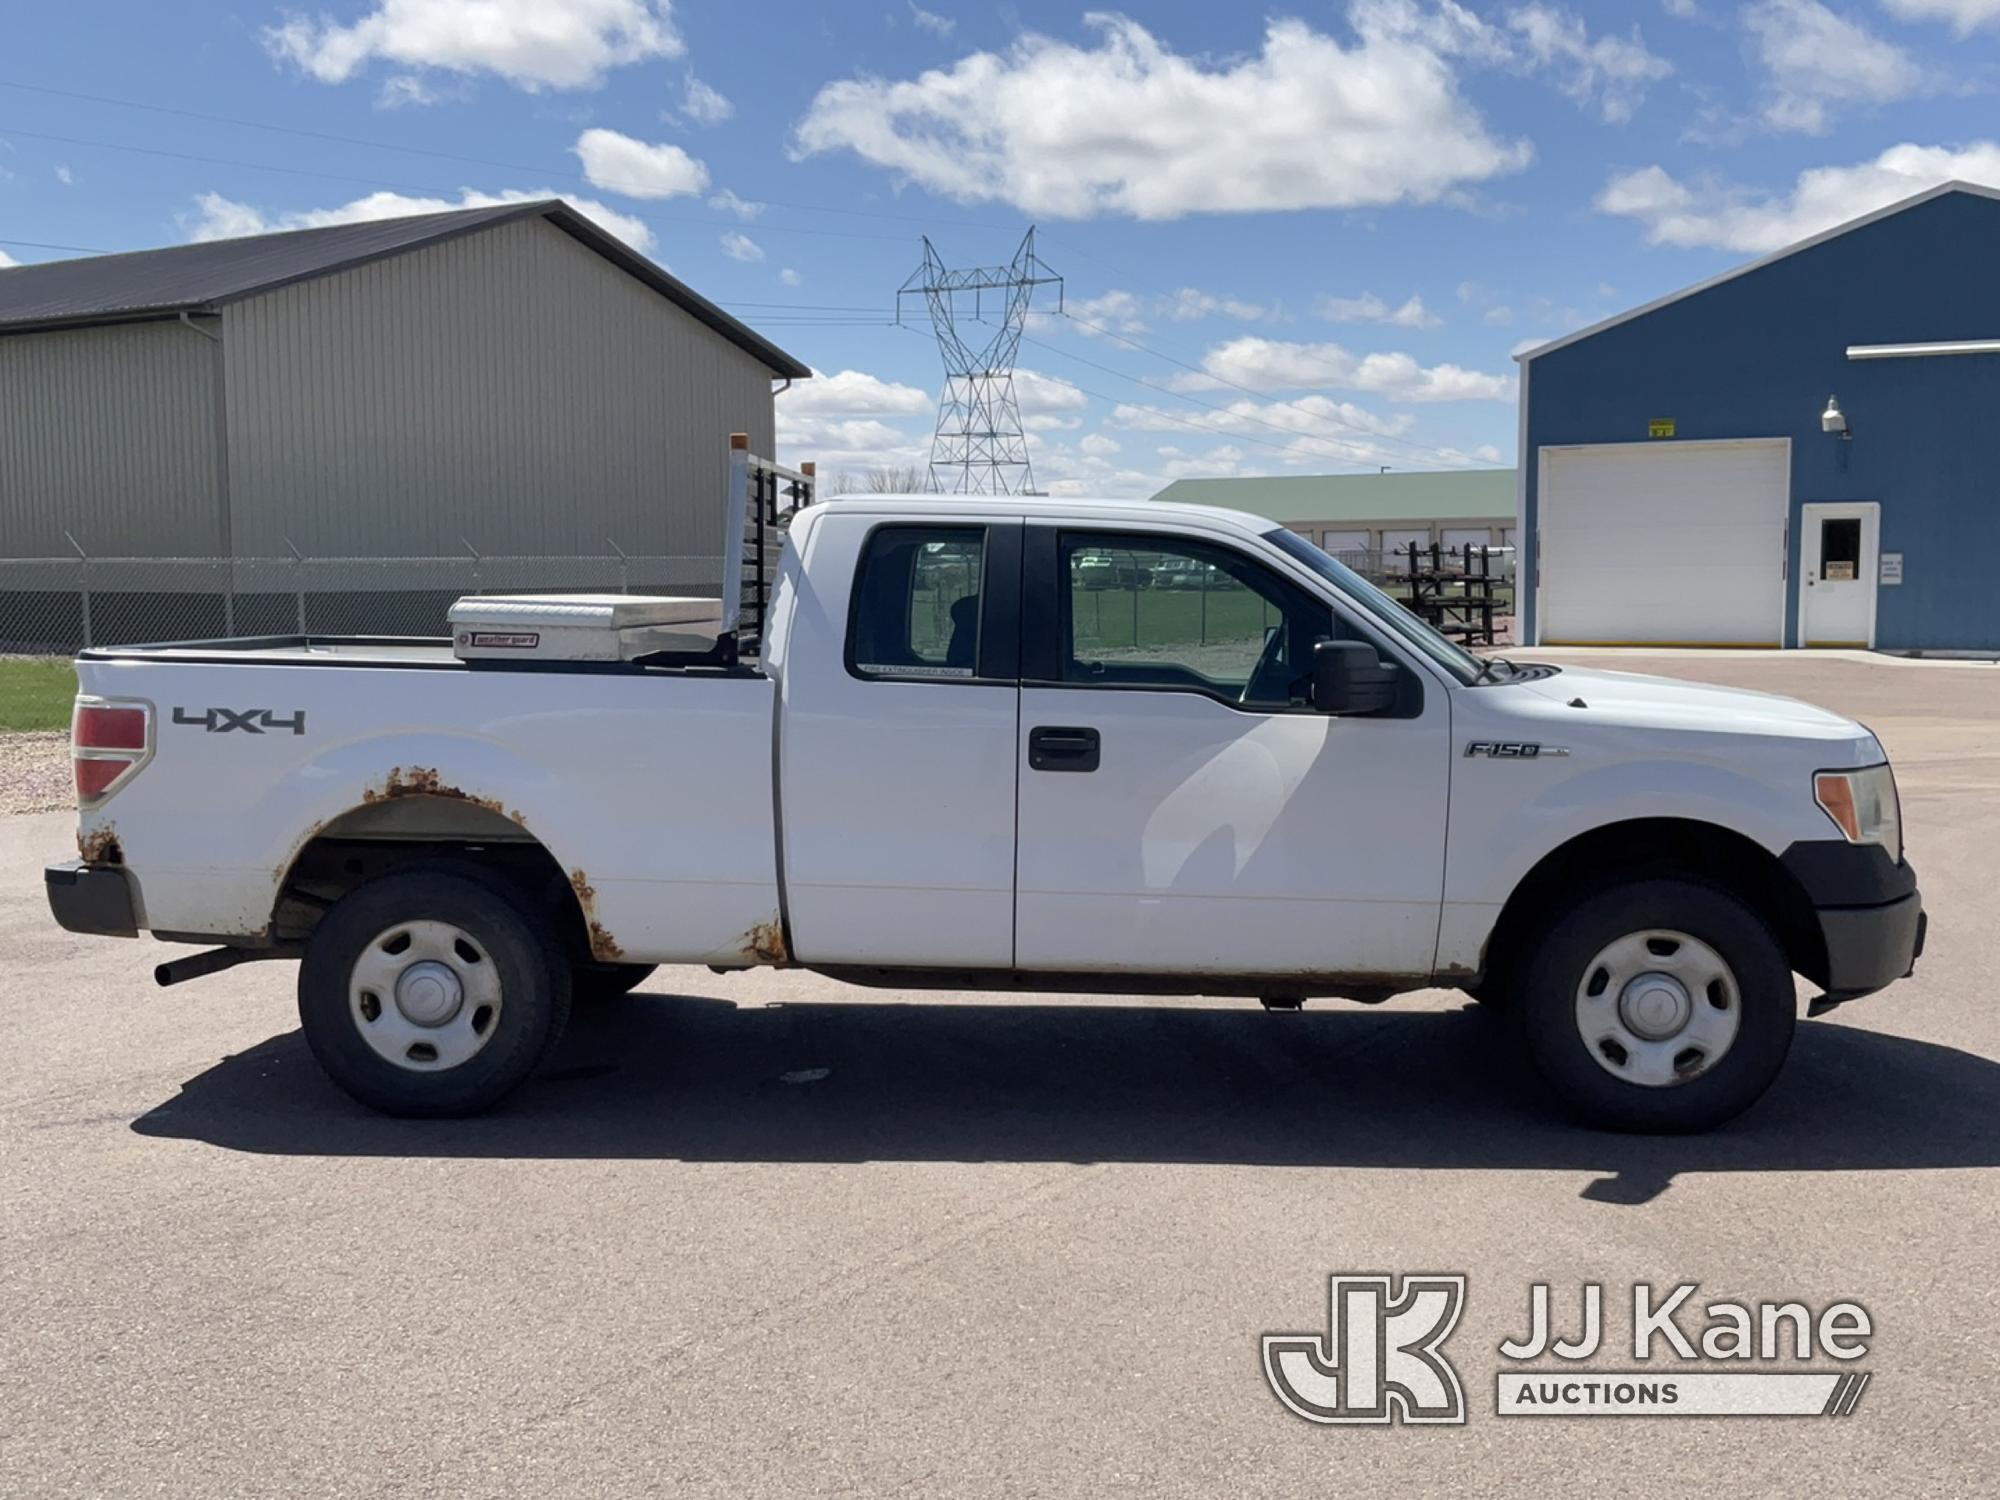 (Harrisburg, SD) 2009 Ford F150 4x4 Extended-Cab Pickup Truck Runs & Moves) (Check Engine Light On.